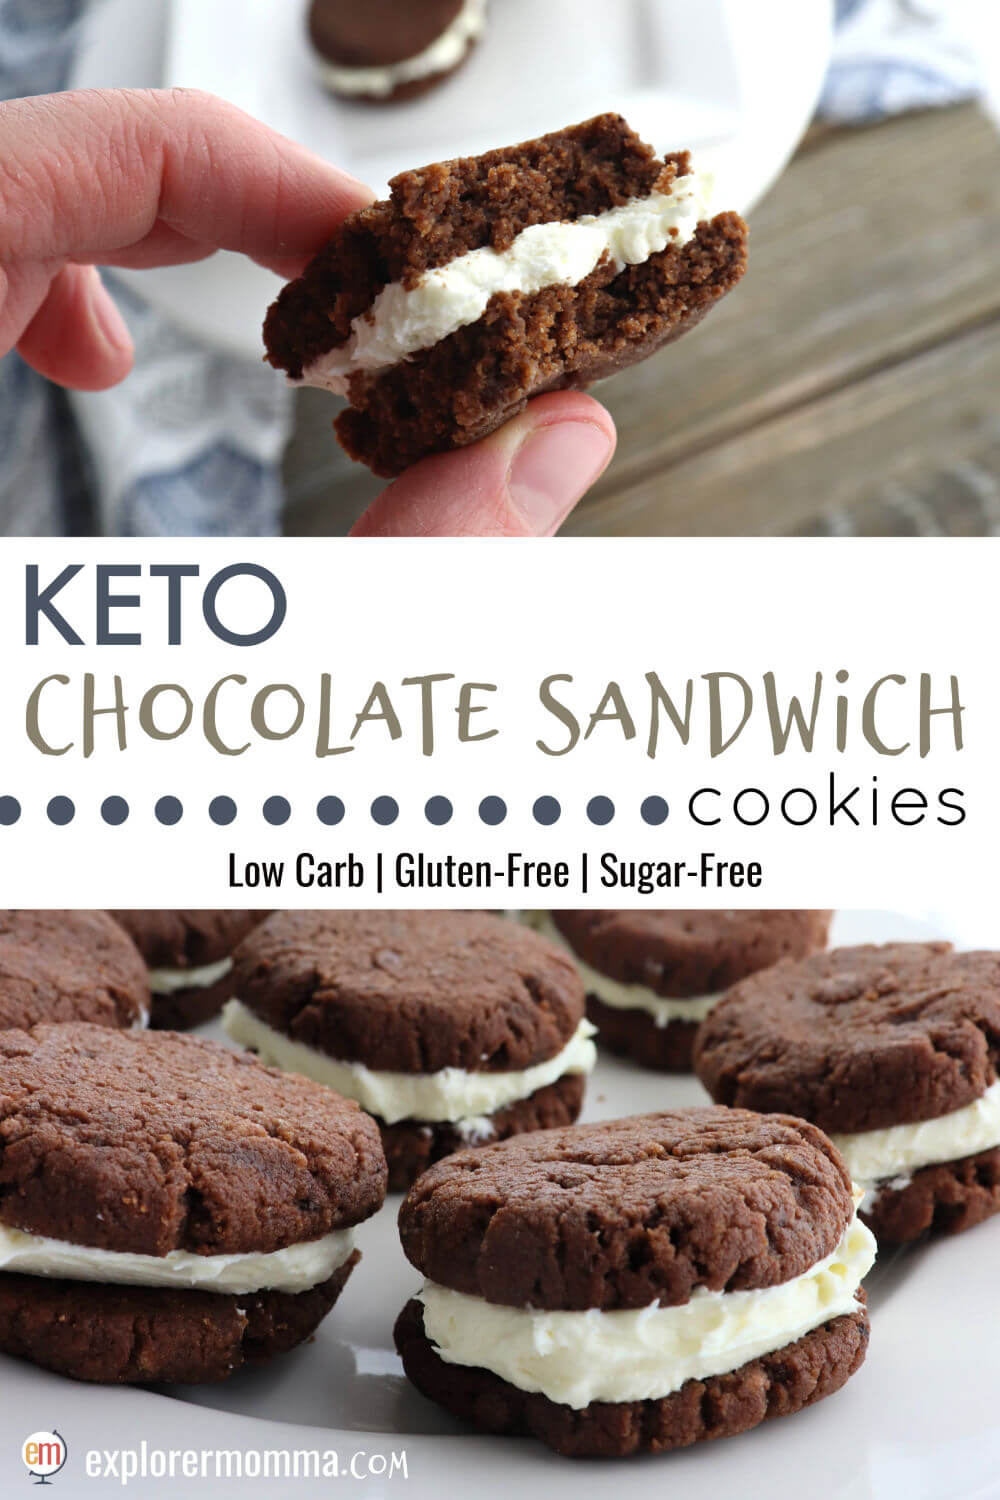 Soft Keto Chocolate Sandwich Cookies are the perfect cross between a keto oreo and a keto whoopie pie. A gluten-free, sugar-free snack or dessert the whole family will love keto diet or not. #ketocookies #lowcarbrecipes #ketorecipes